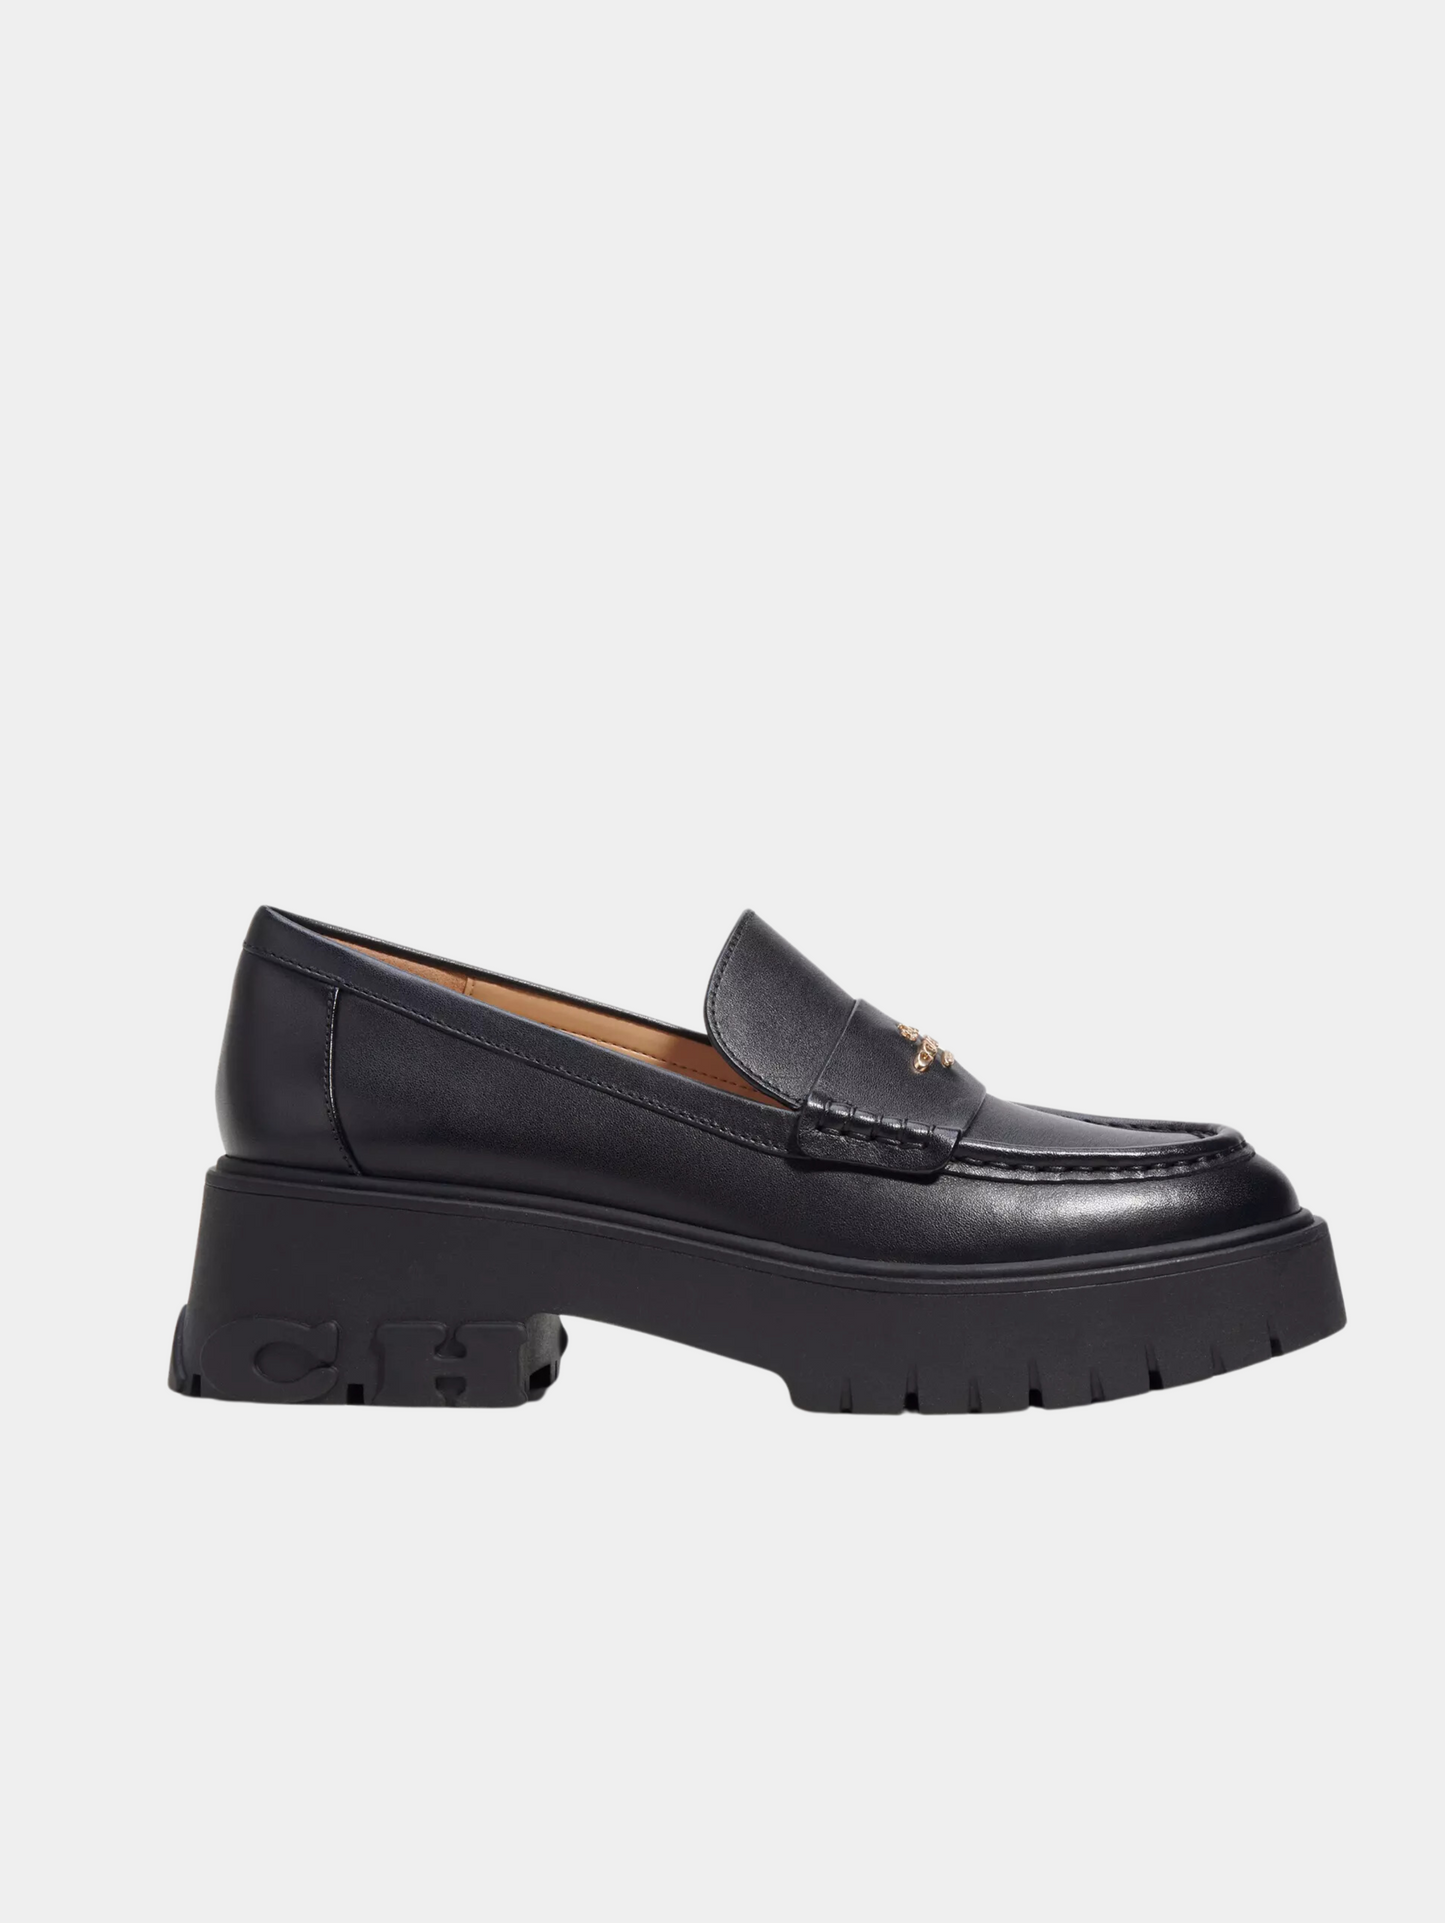 Ruthie Loafer